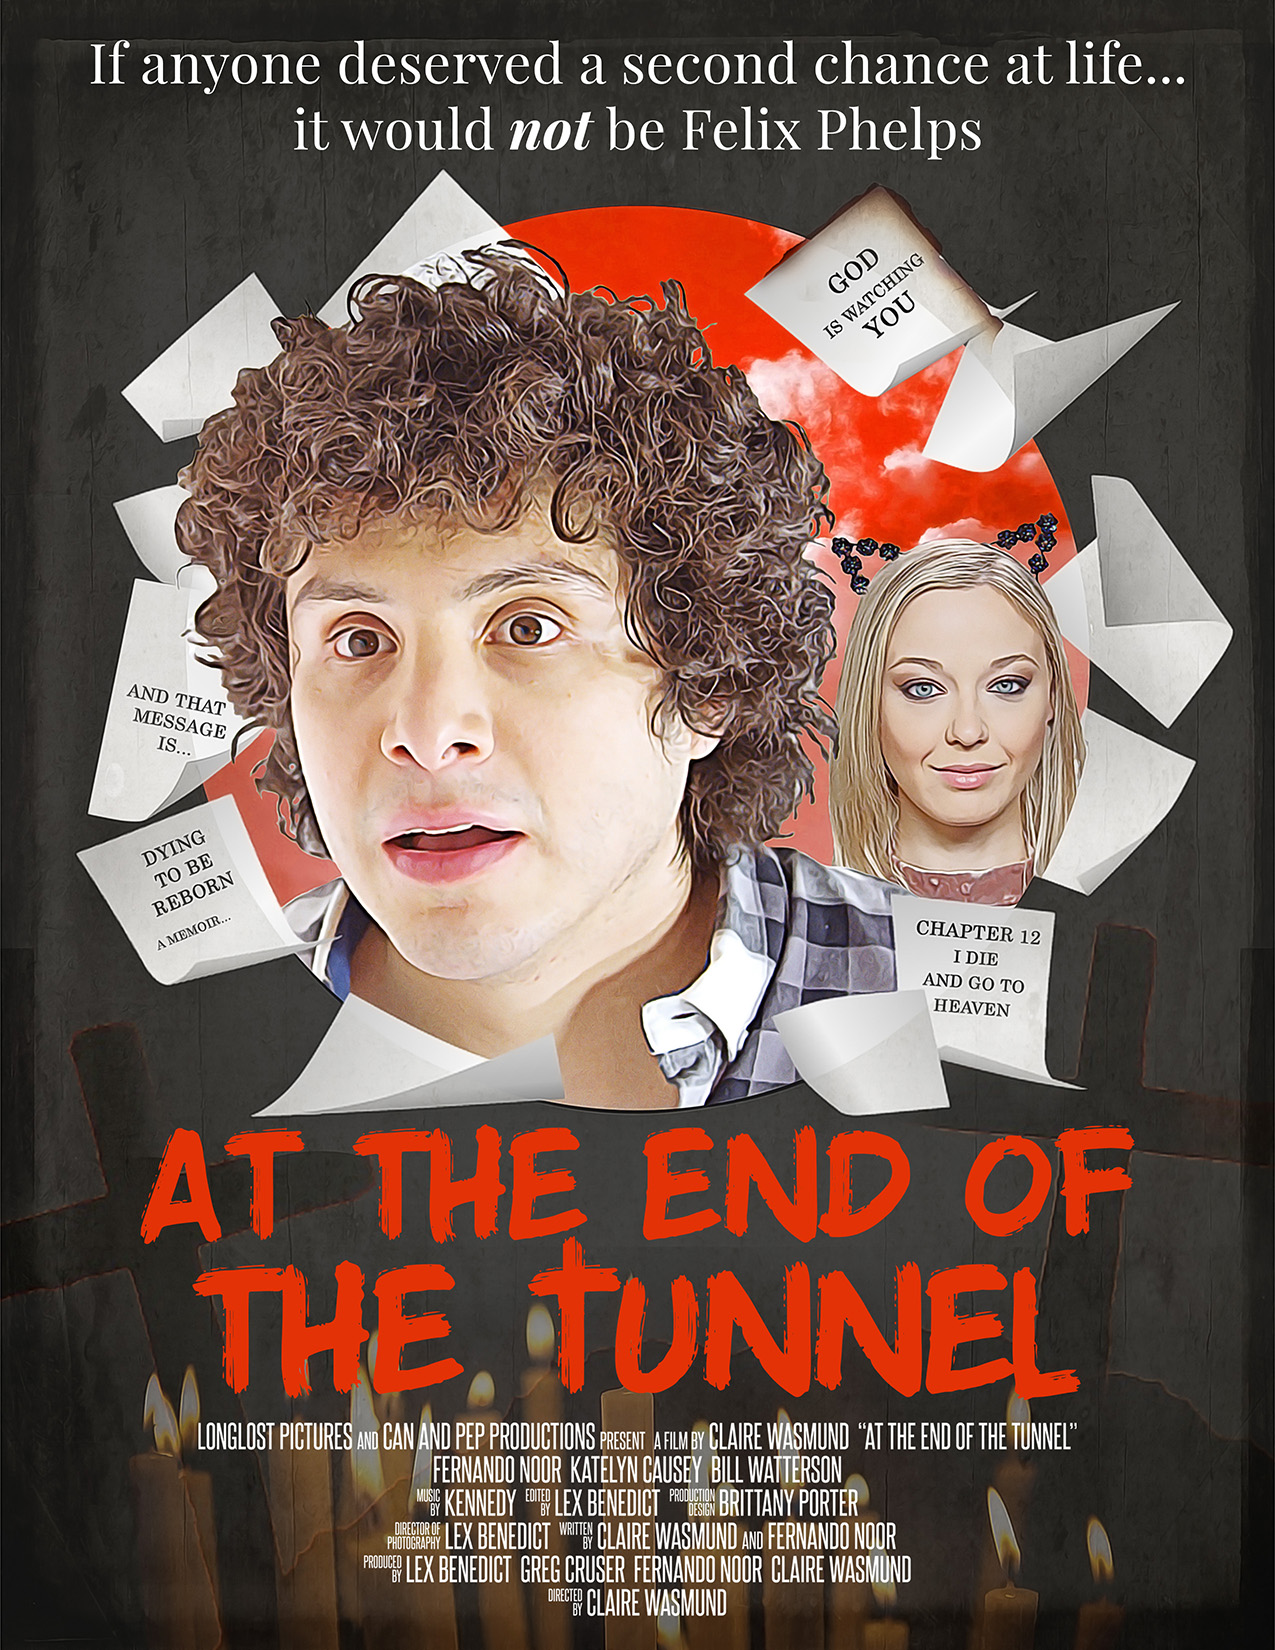 At the End of the Tunnel (2018)